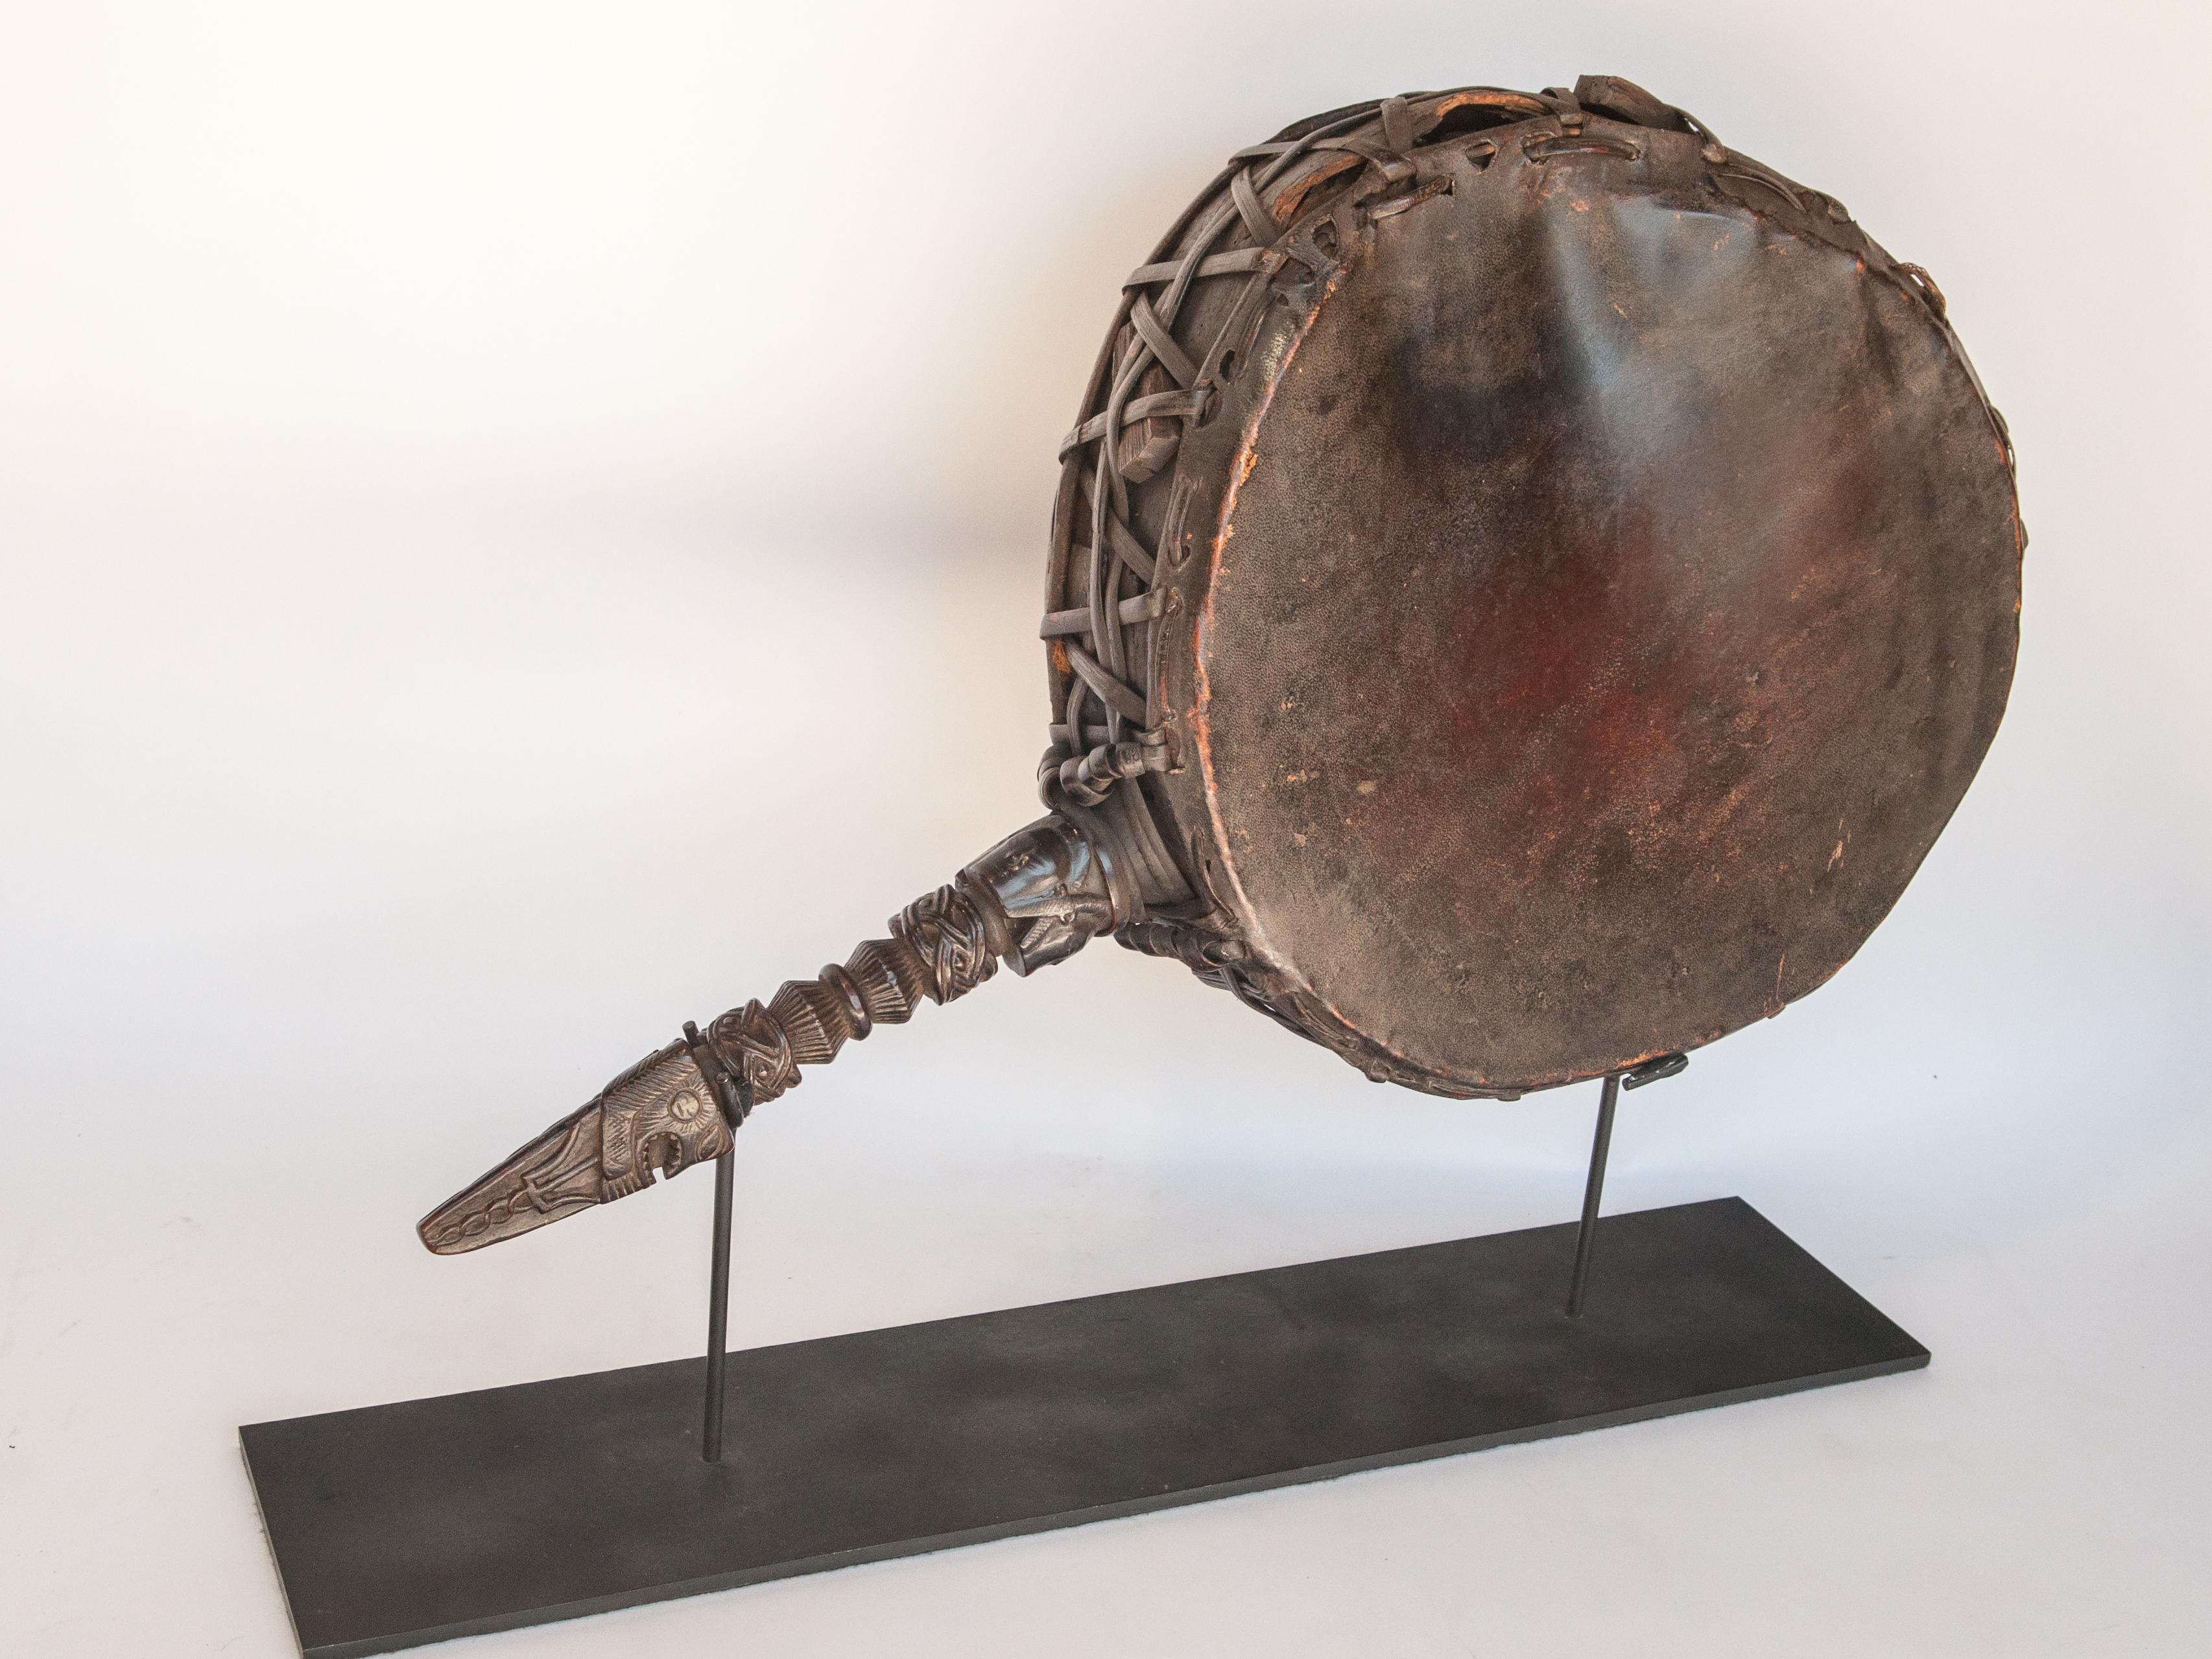 Shaman Drum, Carved Wooden Handle, Nepal Himalaya, Mid-20th Century, on Stand 11